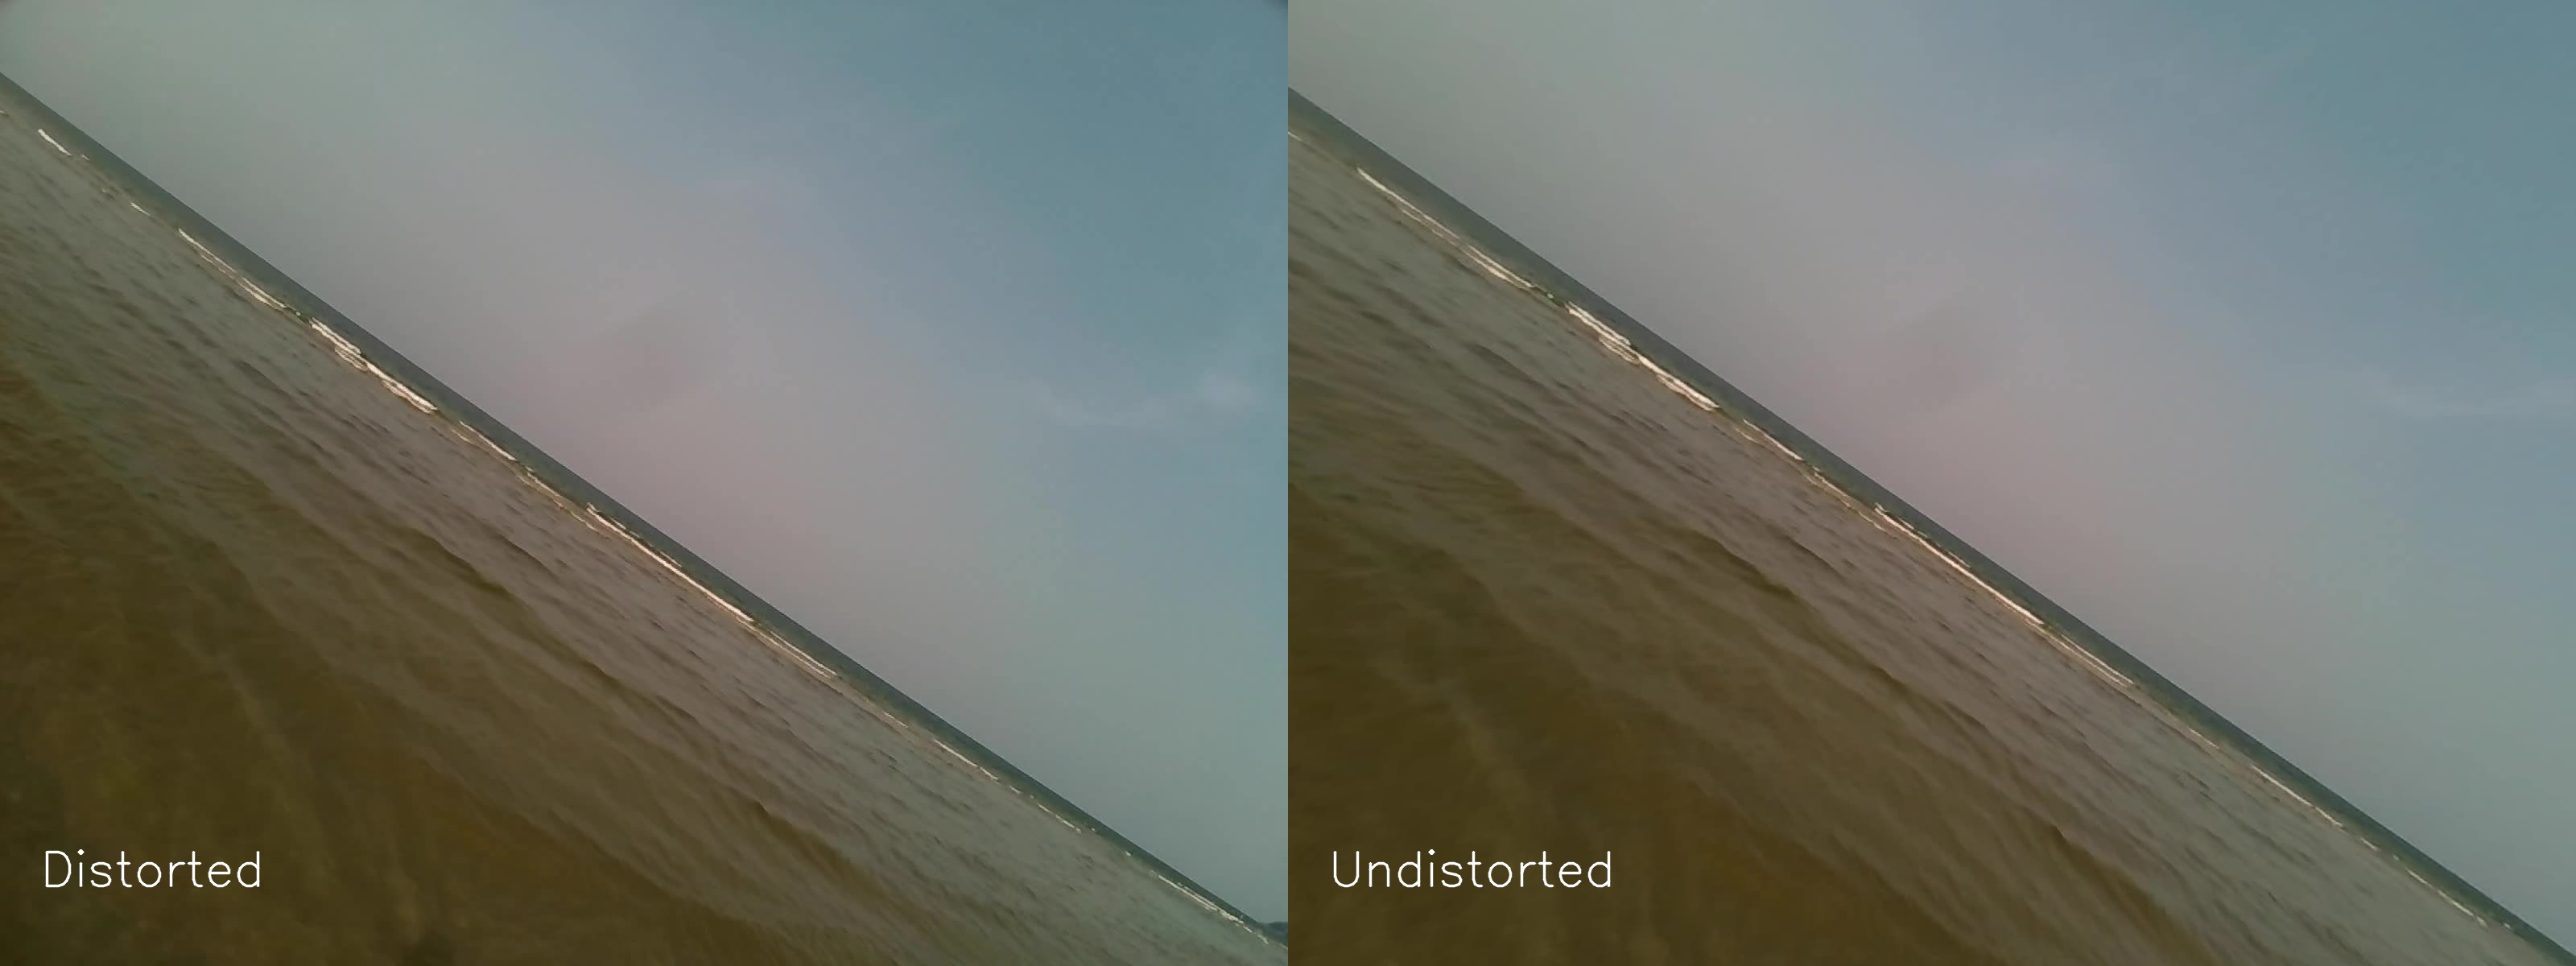 Side by side comparison of a distorted and undistorted image.